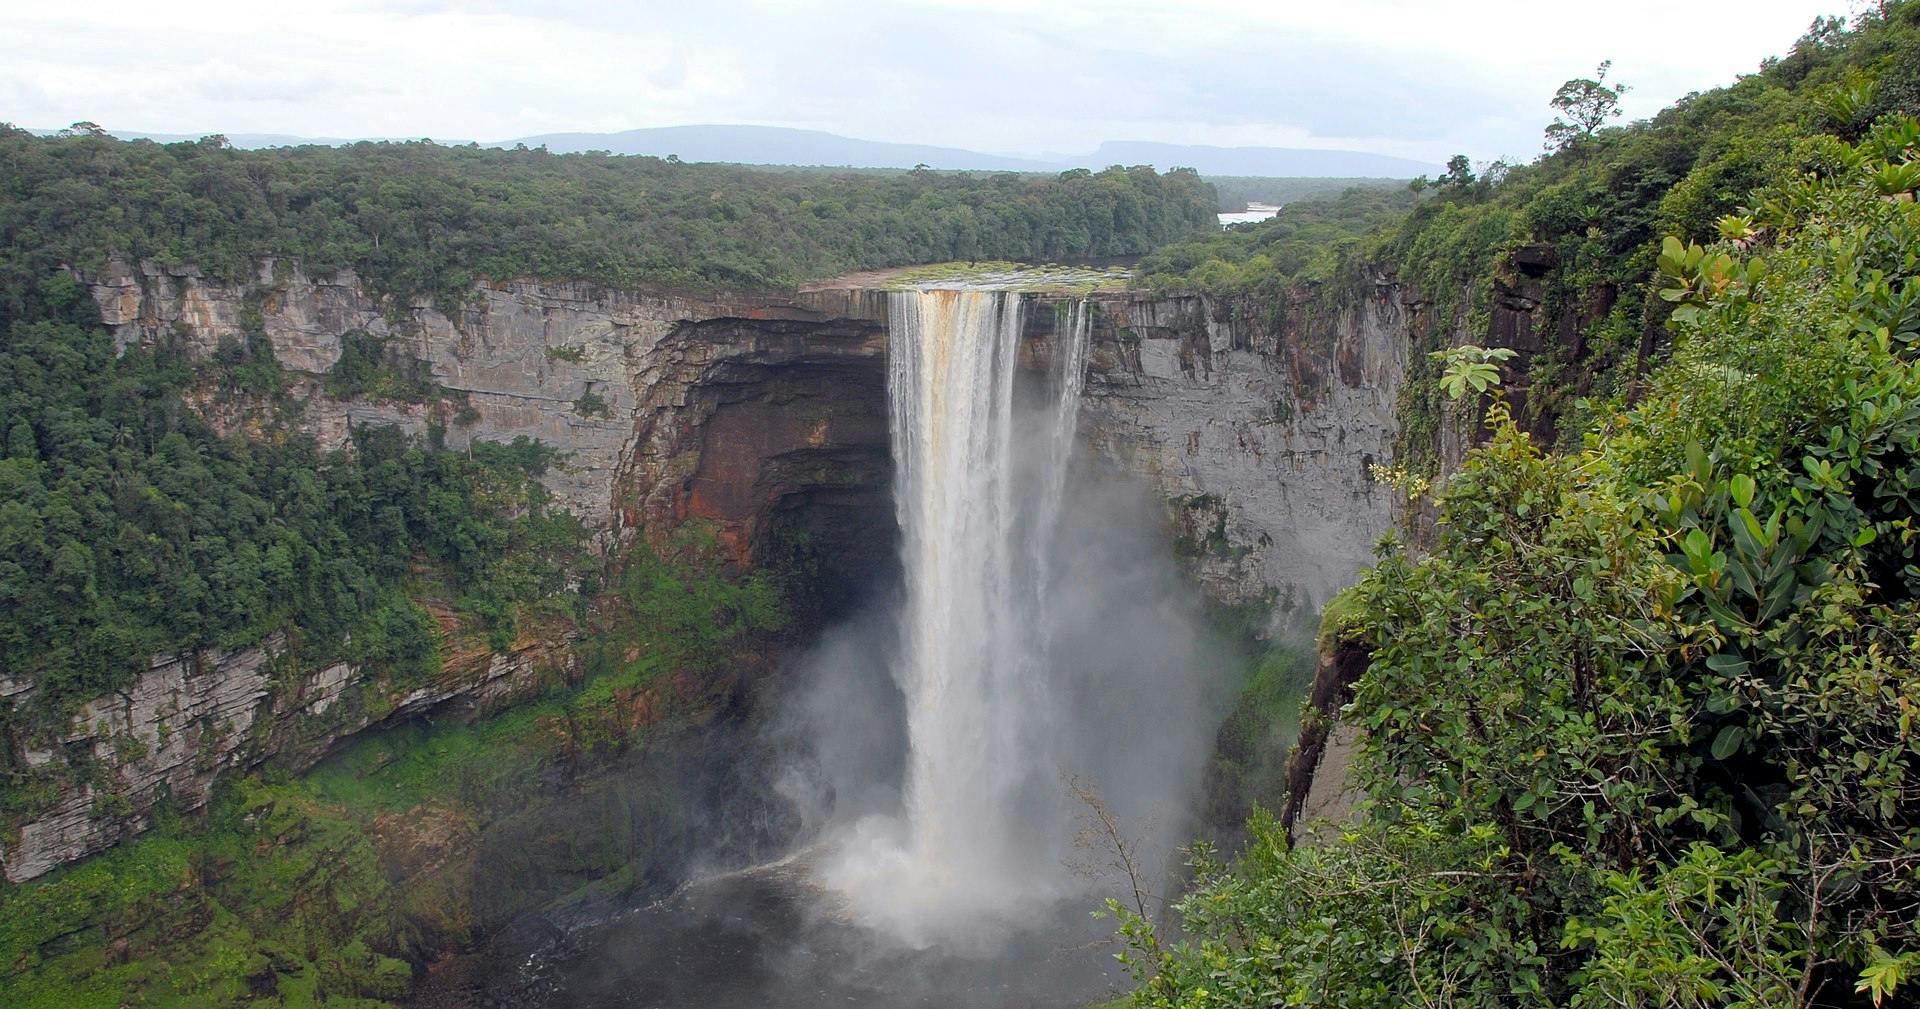 Guianan Highlands Moist Forests. Kaieteur Falls Is A High Volume Waterfall On The Potaro River In Central Guyana.Image Credit Bill Cameron Cc ?auto=compress%2Cformat